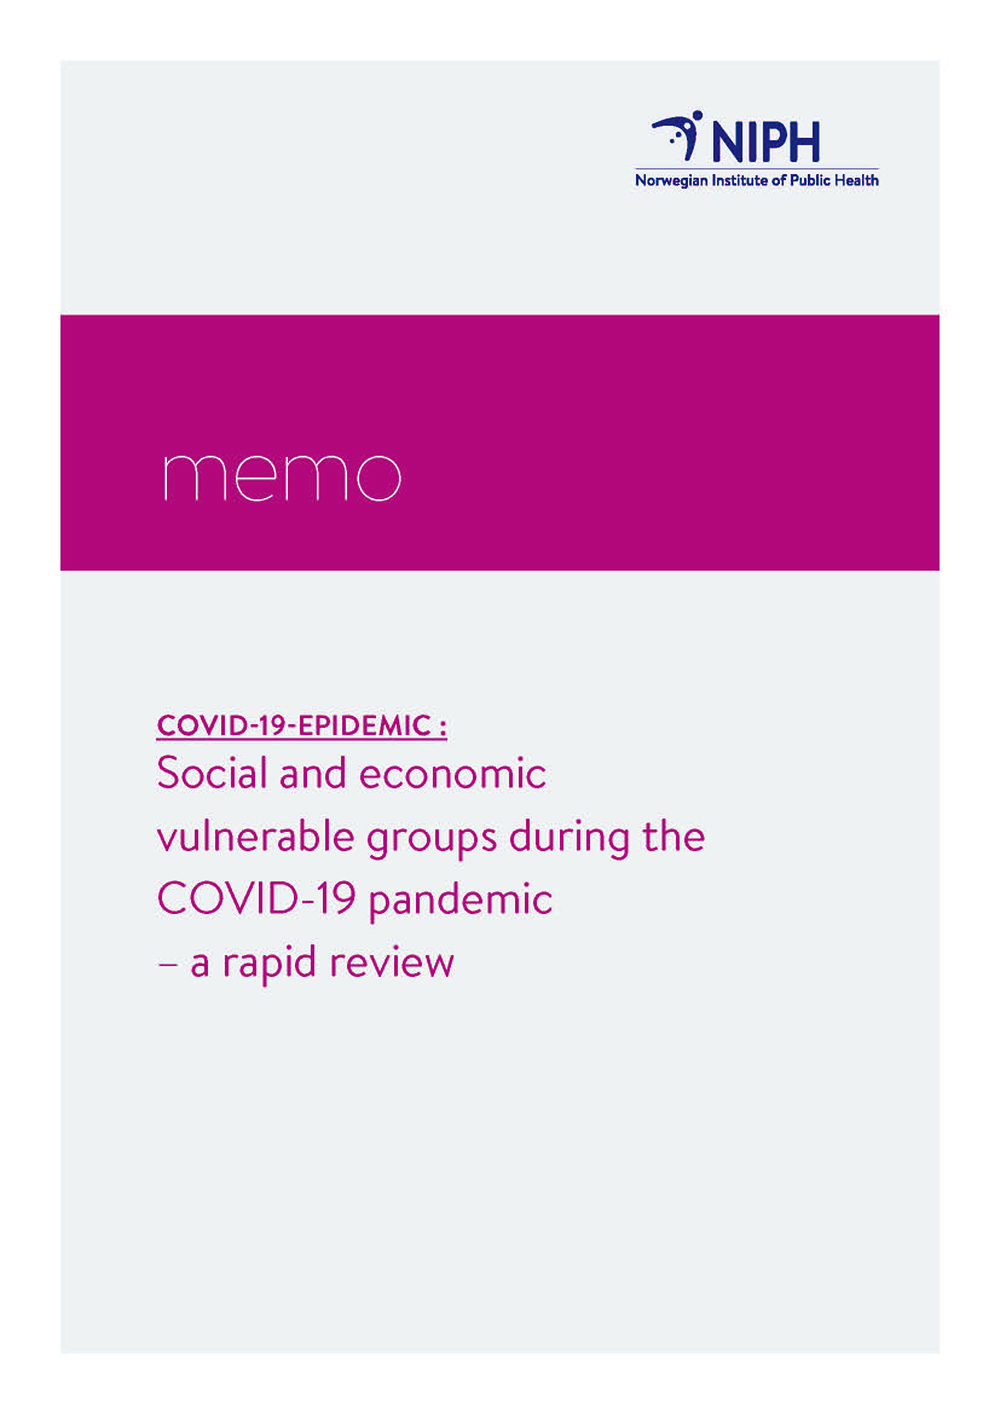 Social and economic vulnerable groups during the COVID-19 pandemic - NIPH